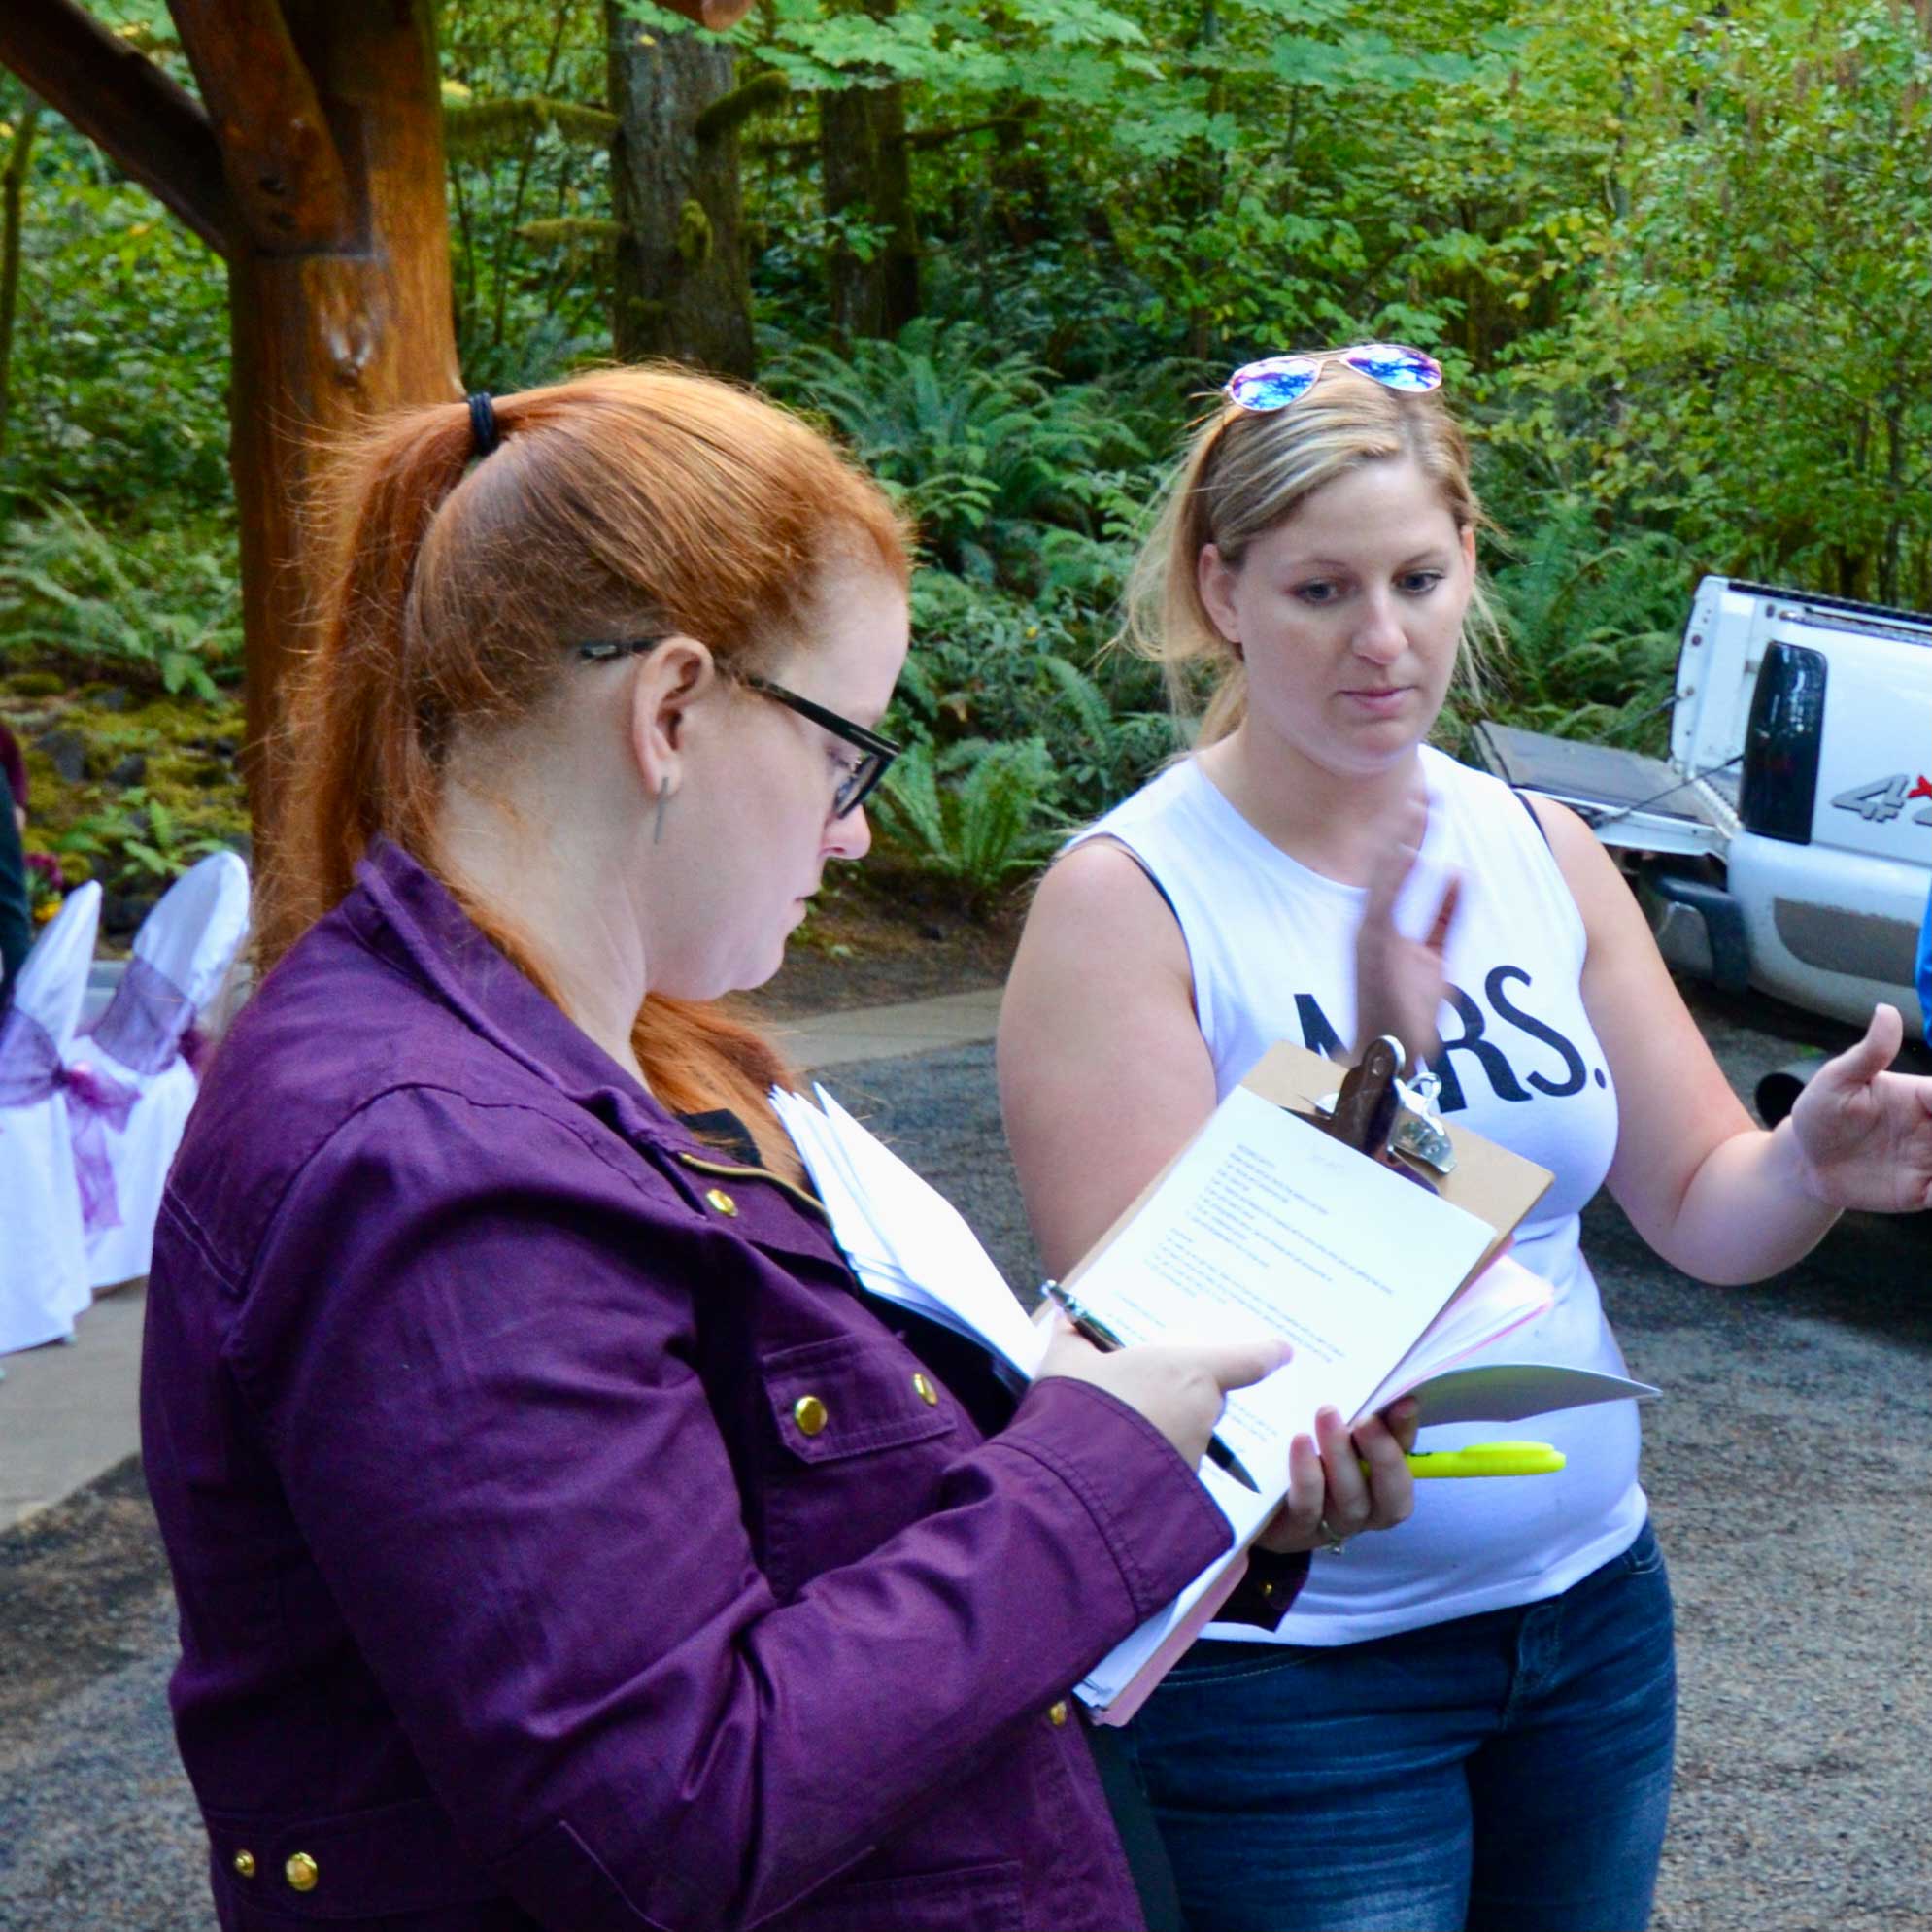 Woman with a white tank top that says "Mrs" talking to a woman with red hair in a ponytail wearing a purple jacket and holding a clipboard